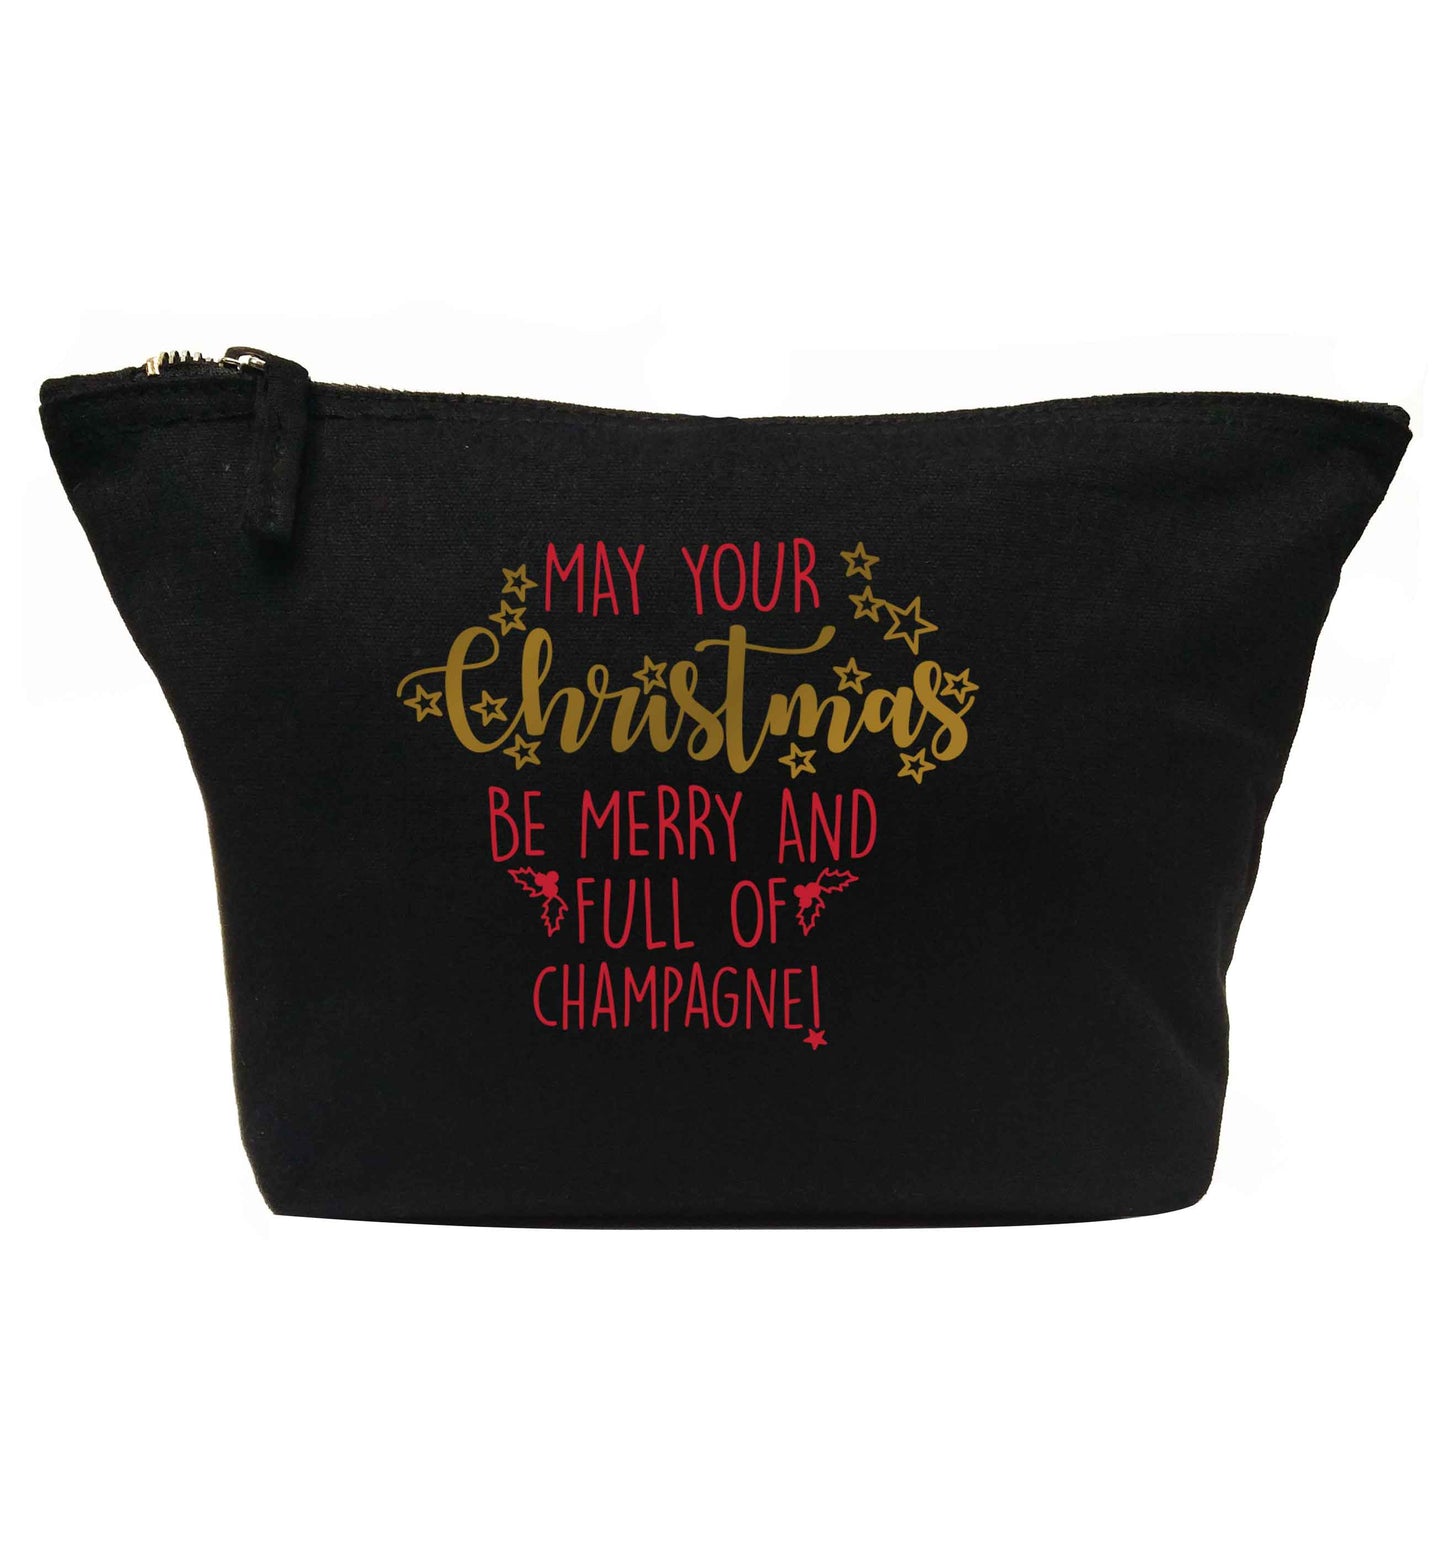 May your Christmas be merry and full of champagne | makeup / wash bag